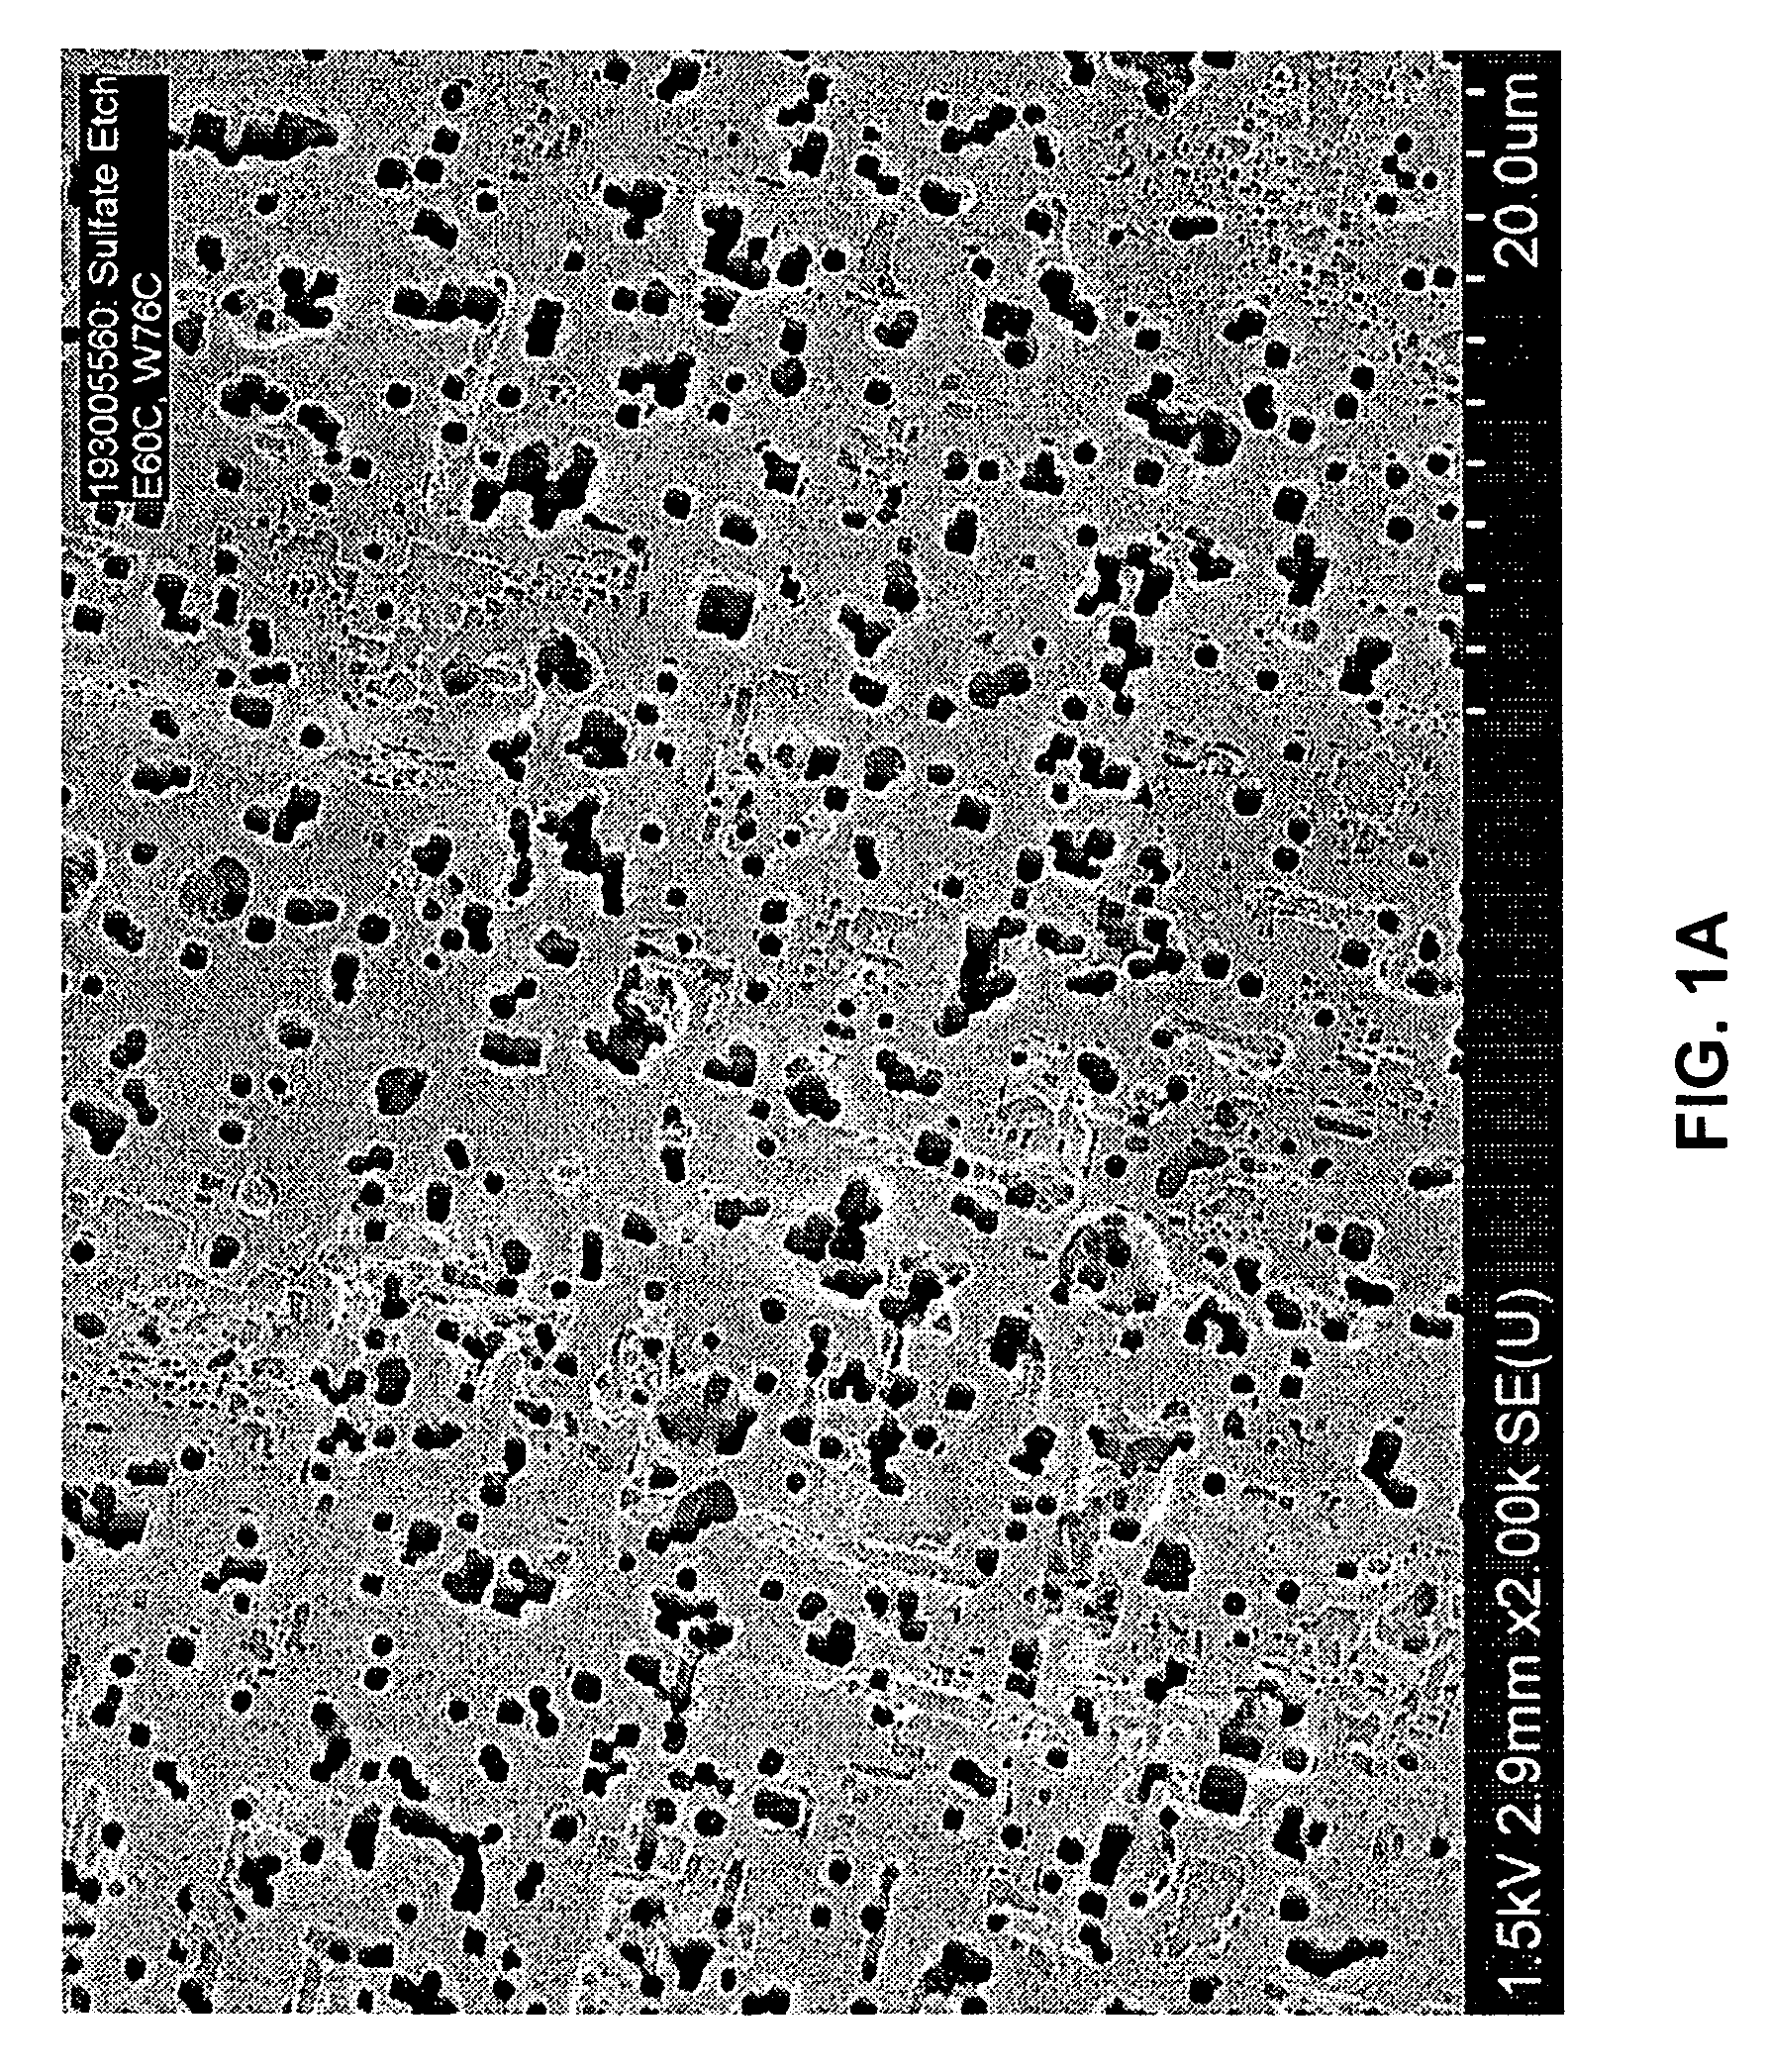 Process for producing high etch gains for electrolytic capacitor manufacturing